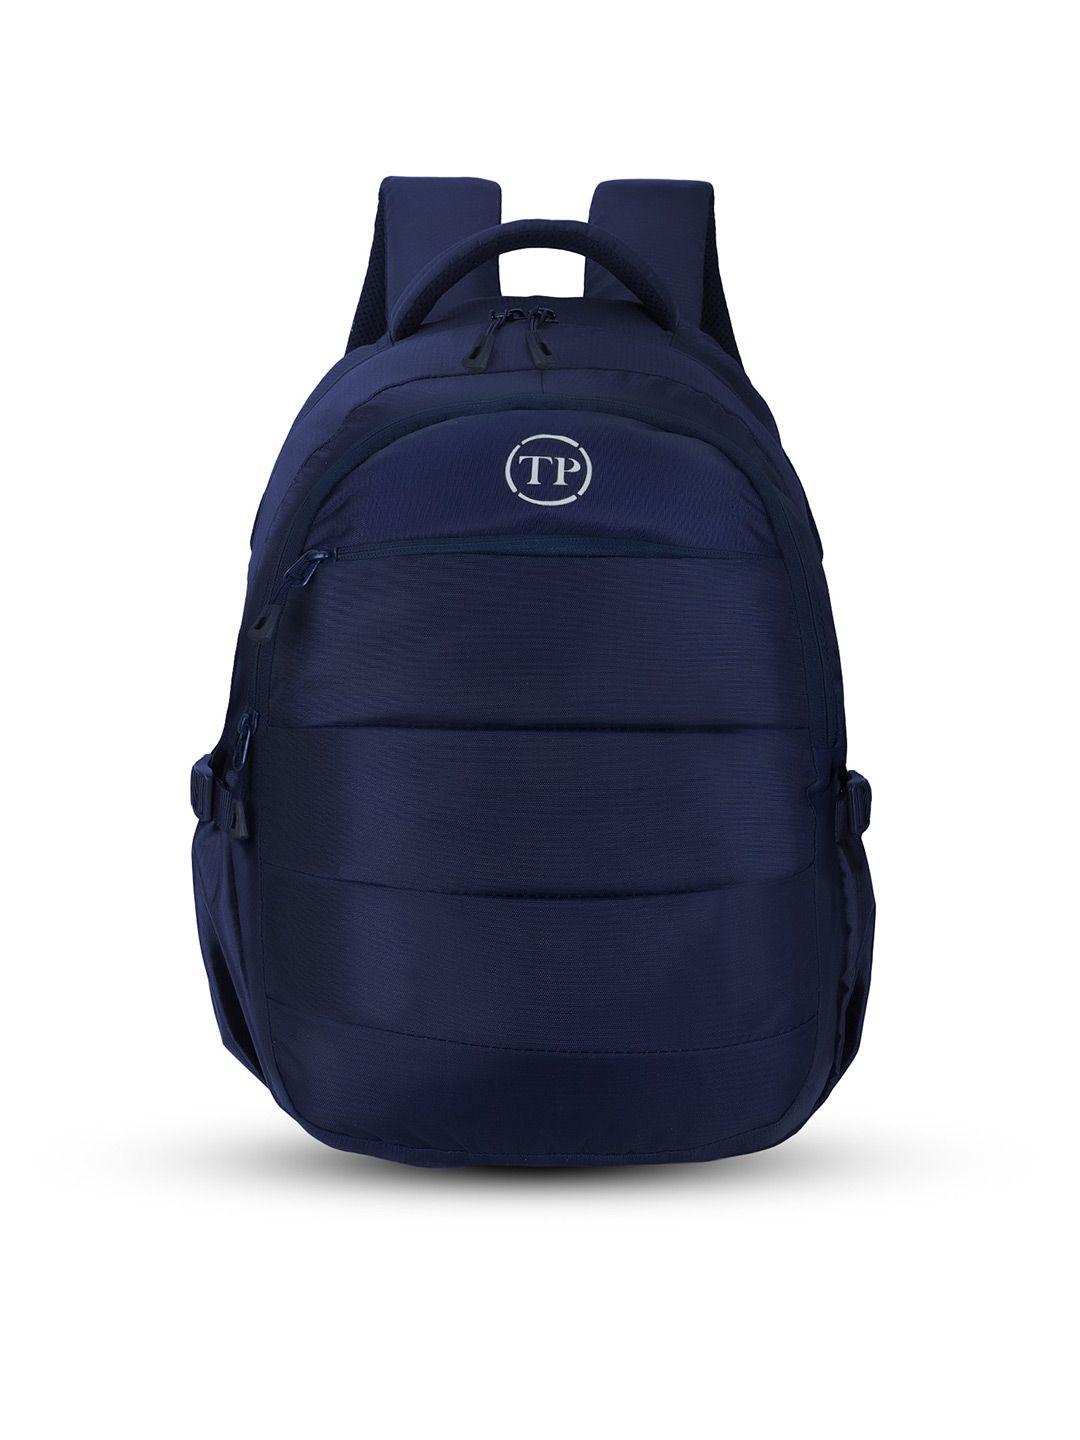 travel point brand logo backpack with compression straps